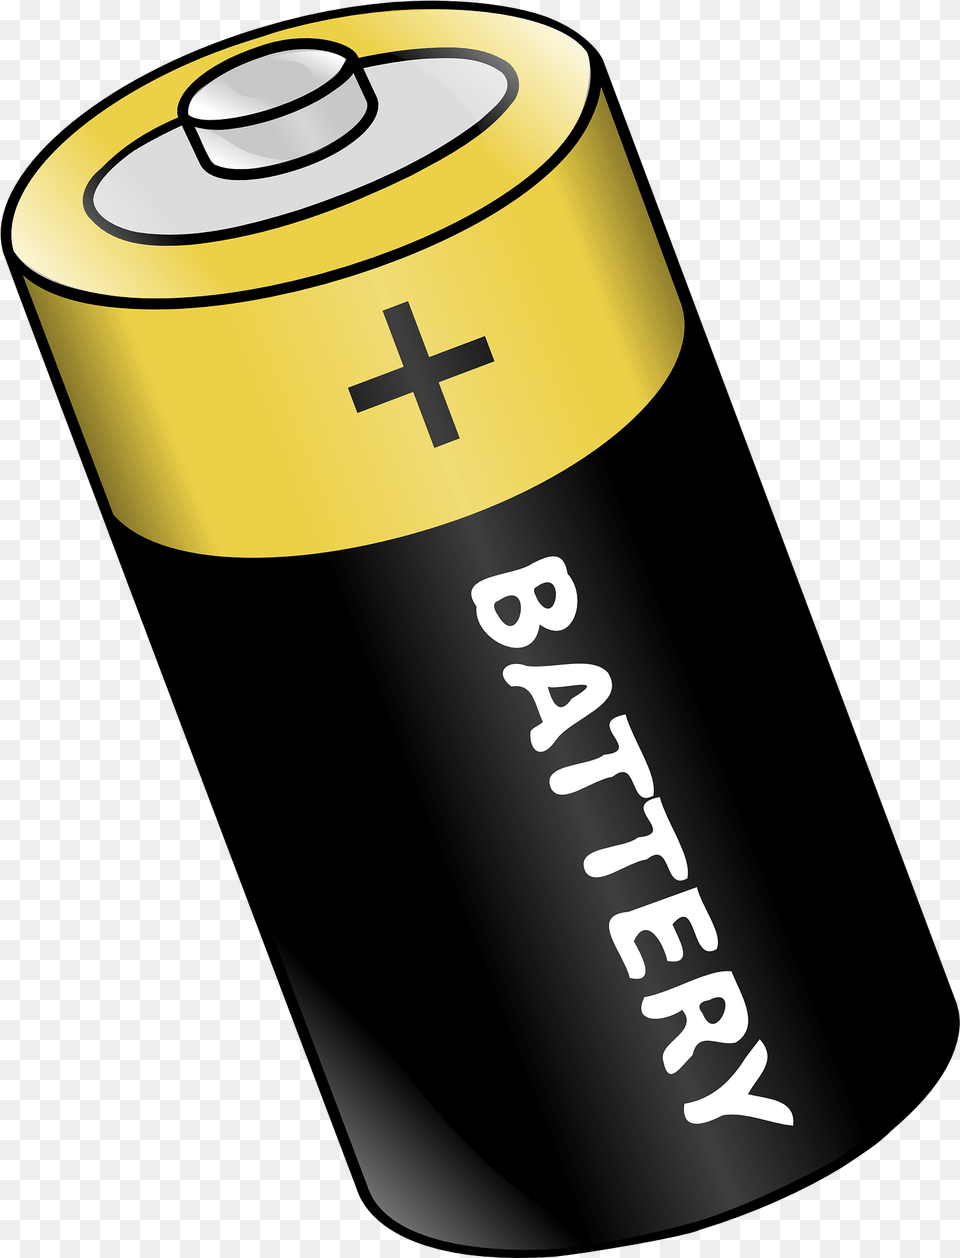 Transparent Background Battery Clipart Battery, Weapon, Tin Png Image